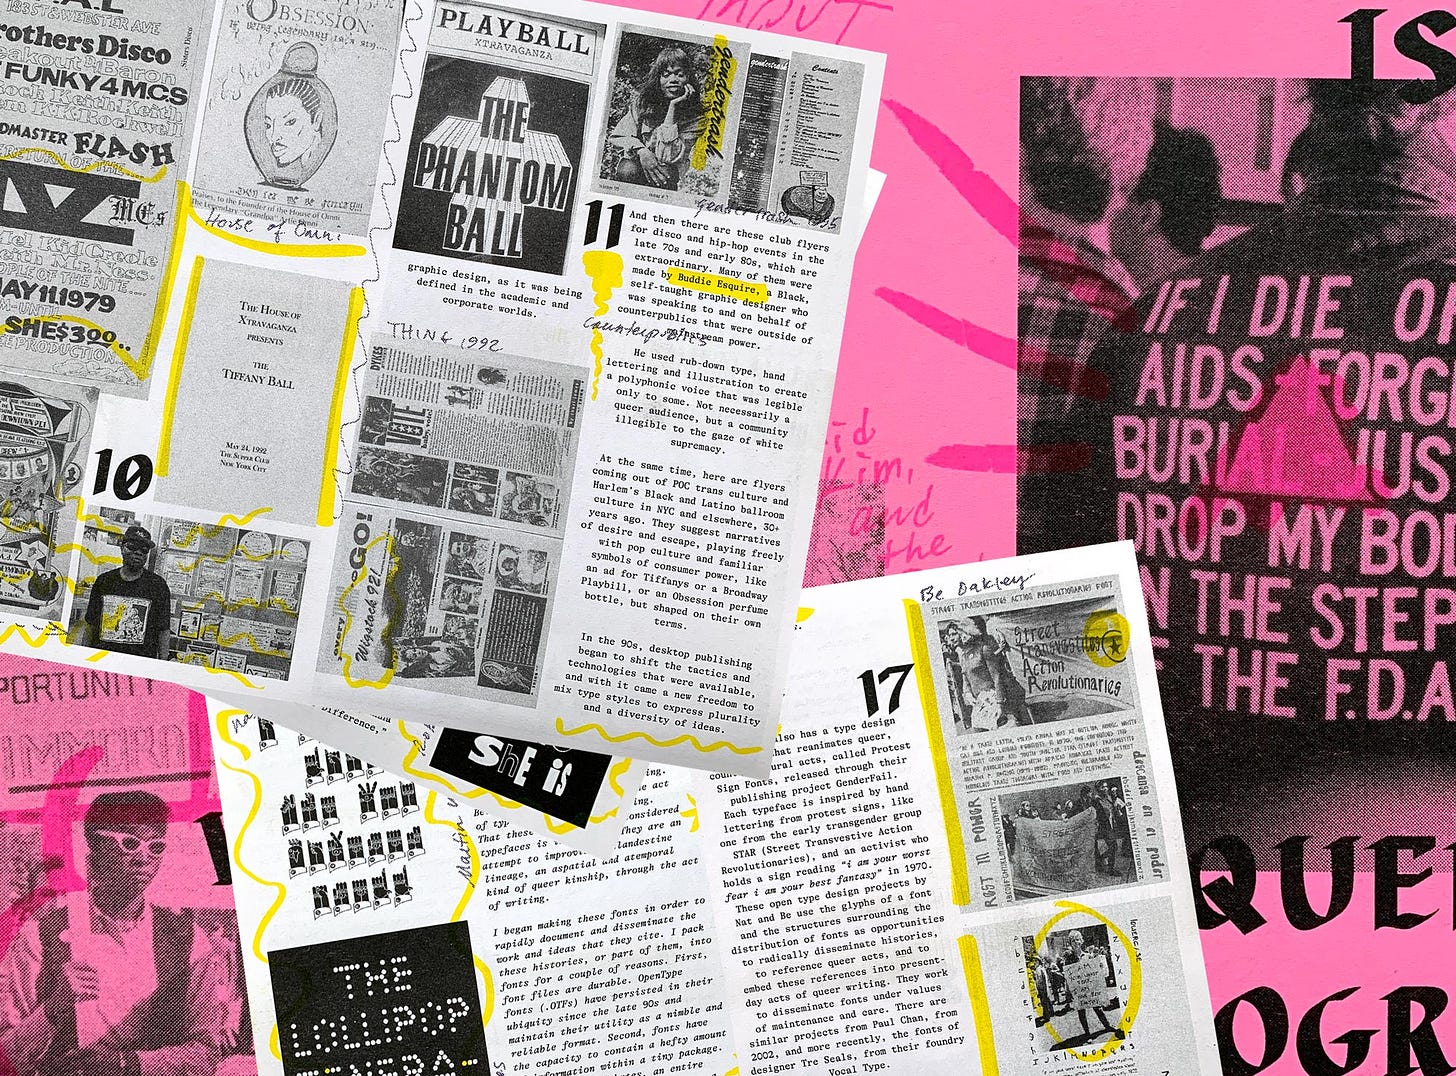 Pages from the zine, What is Queer Typography, scattered and overlaid on one another. Some pages are pink and black, others black and white with yellow highlights. The pages include images of queer advertisements and zines, as well as David Wojnarowicz's famous jean jacket printed with the words: IF I DIE OF AIDS—FORGET BURIAL—JUST DROP MY BODY ON THE STEPS OF THE FDA.